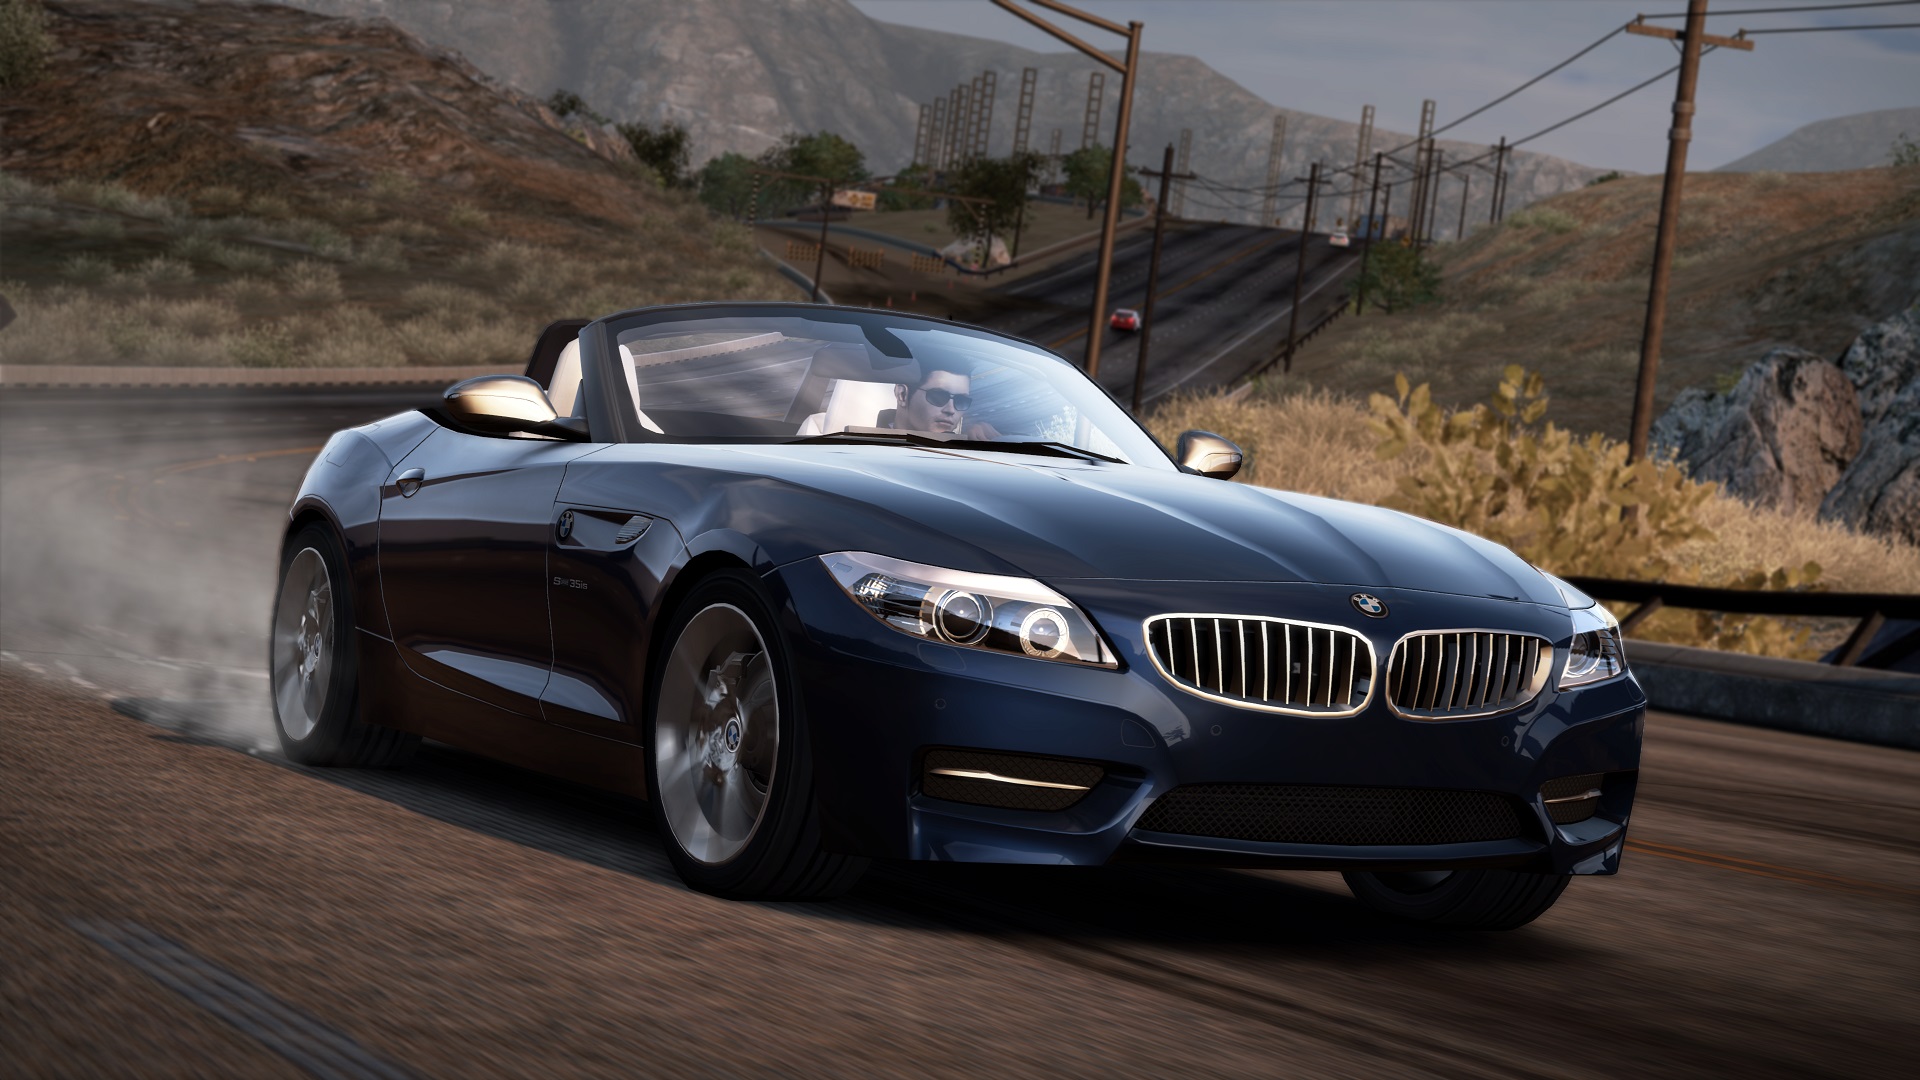 BMW Z4 sDrive35is (E89), Need for Speed Wiki